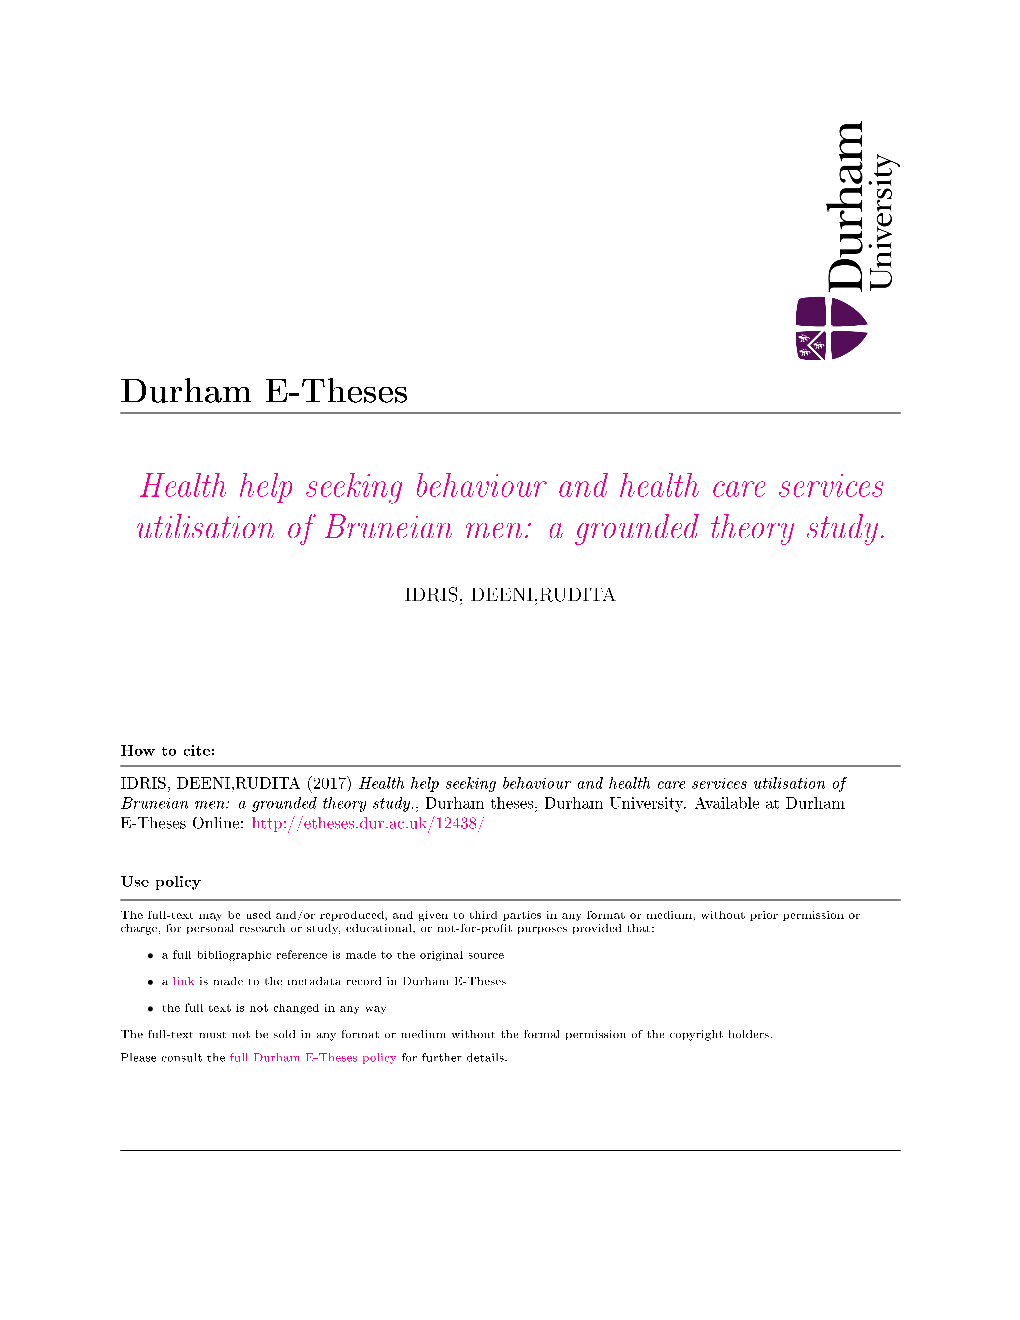 Health Help Seeking Behaviour and Health Care Services Utilisation of Bruneian Men: a Grounded Theory Study